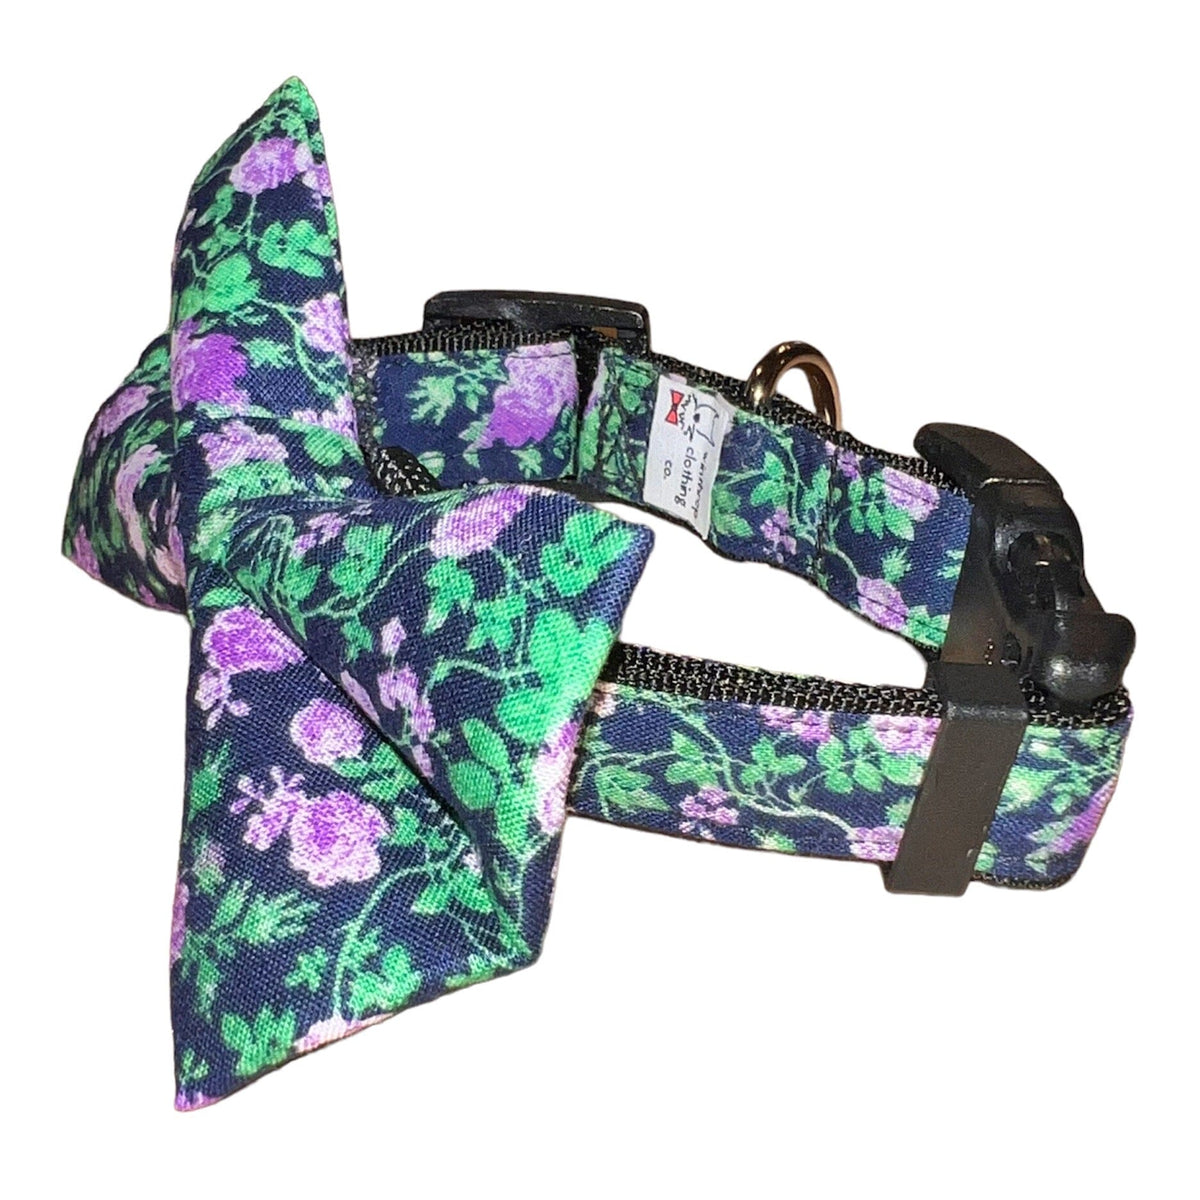 Bow Tie & Collar Set - Navy & Purple Floral - Gift & Gather